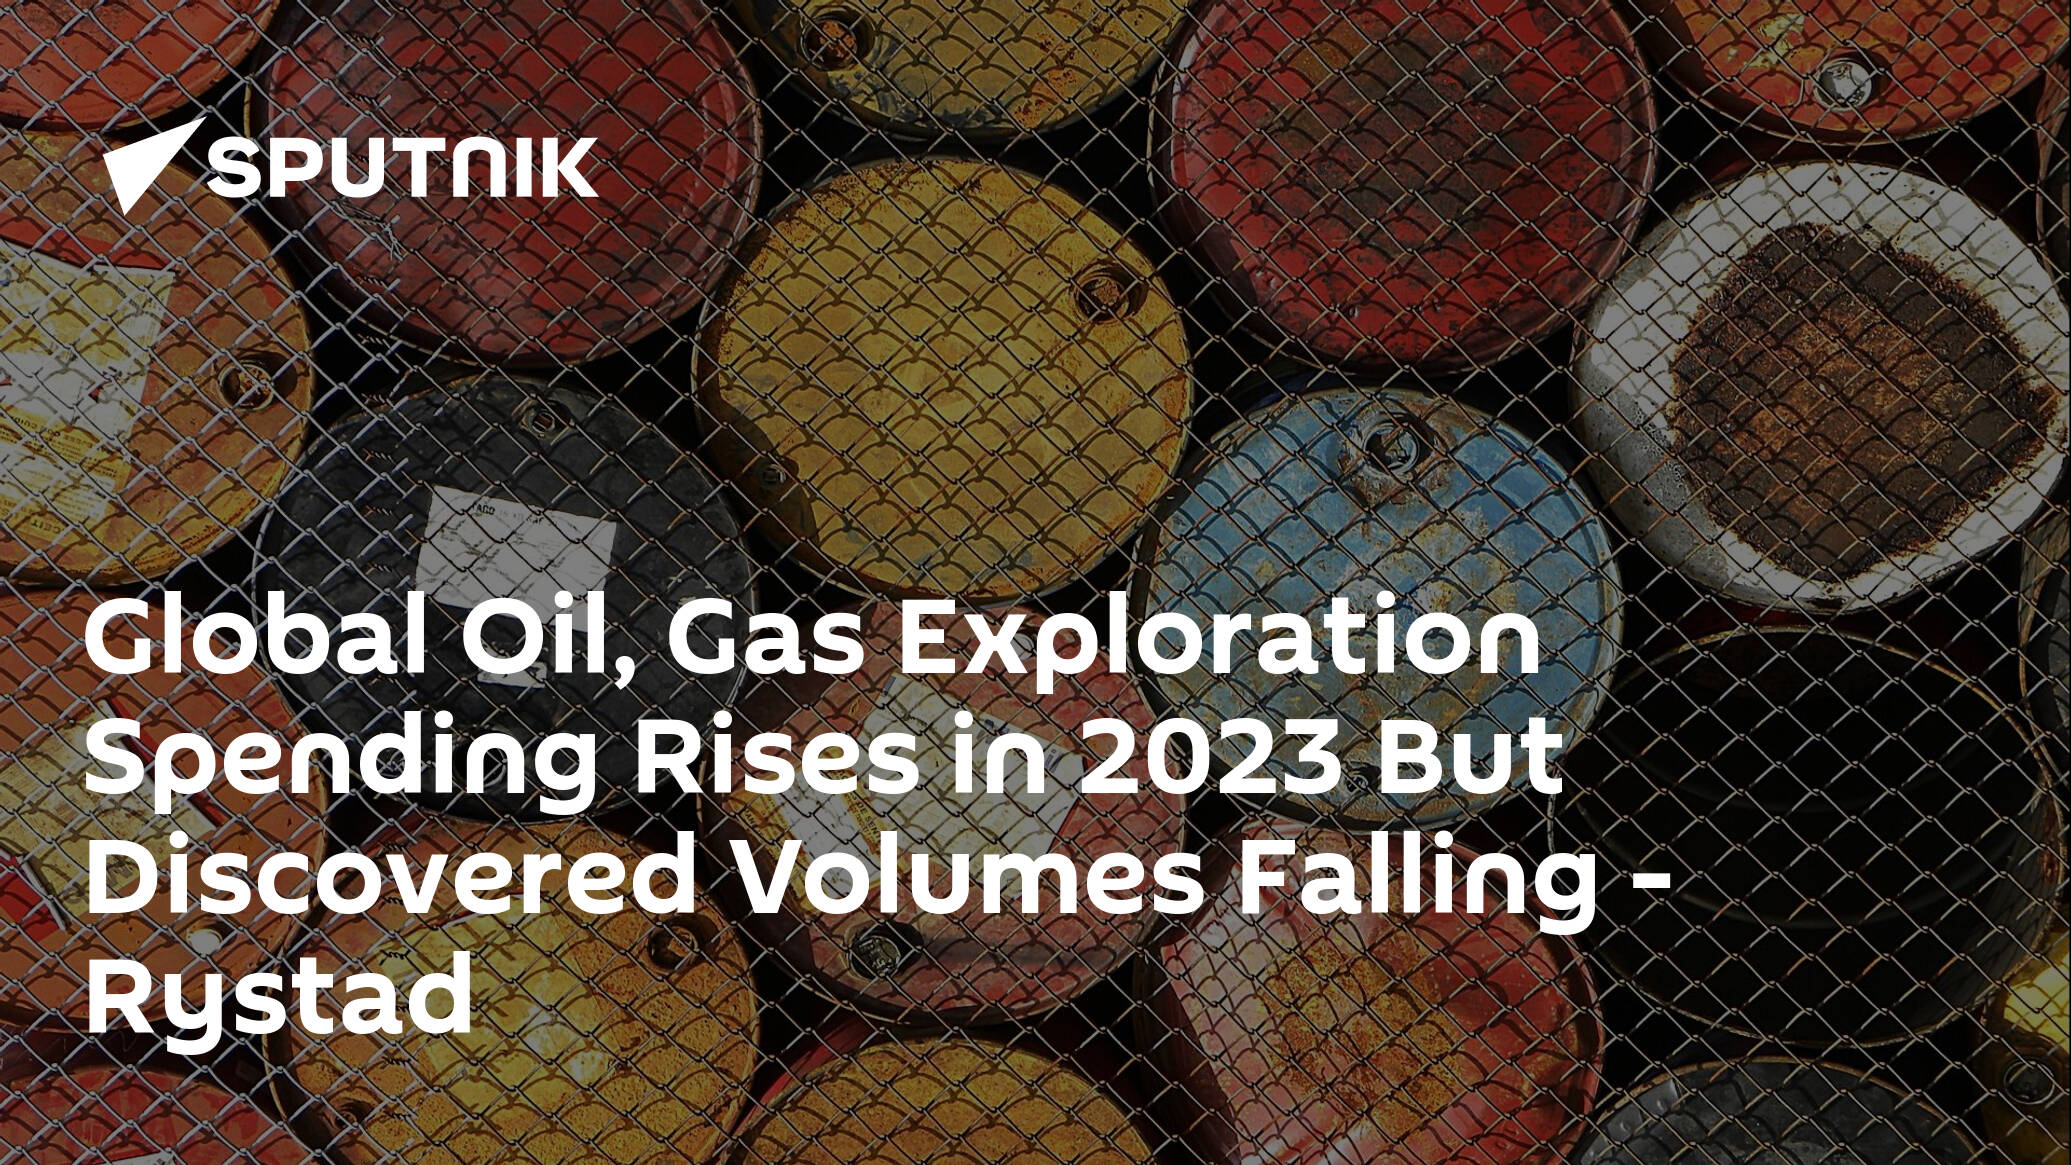 Global Oil, Gas Exploration Spending Rises in 2023 But Discovered Volumes Falling – Rystad